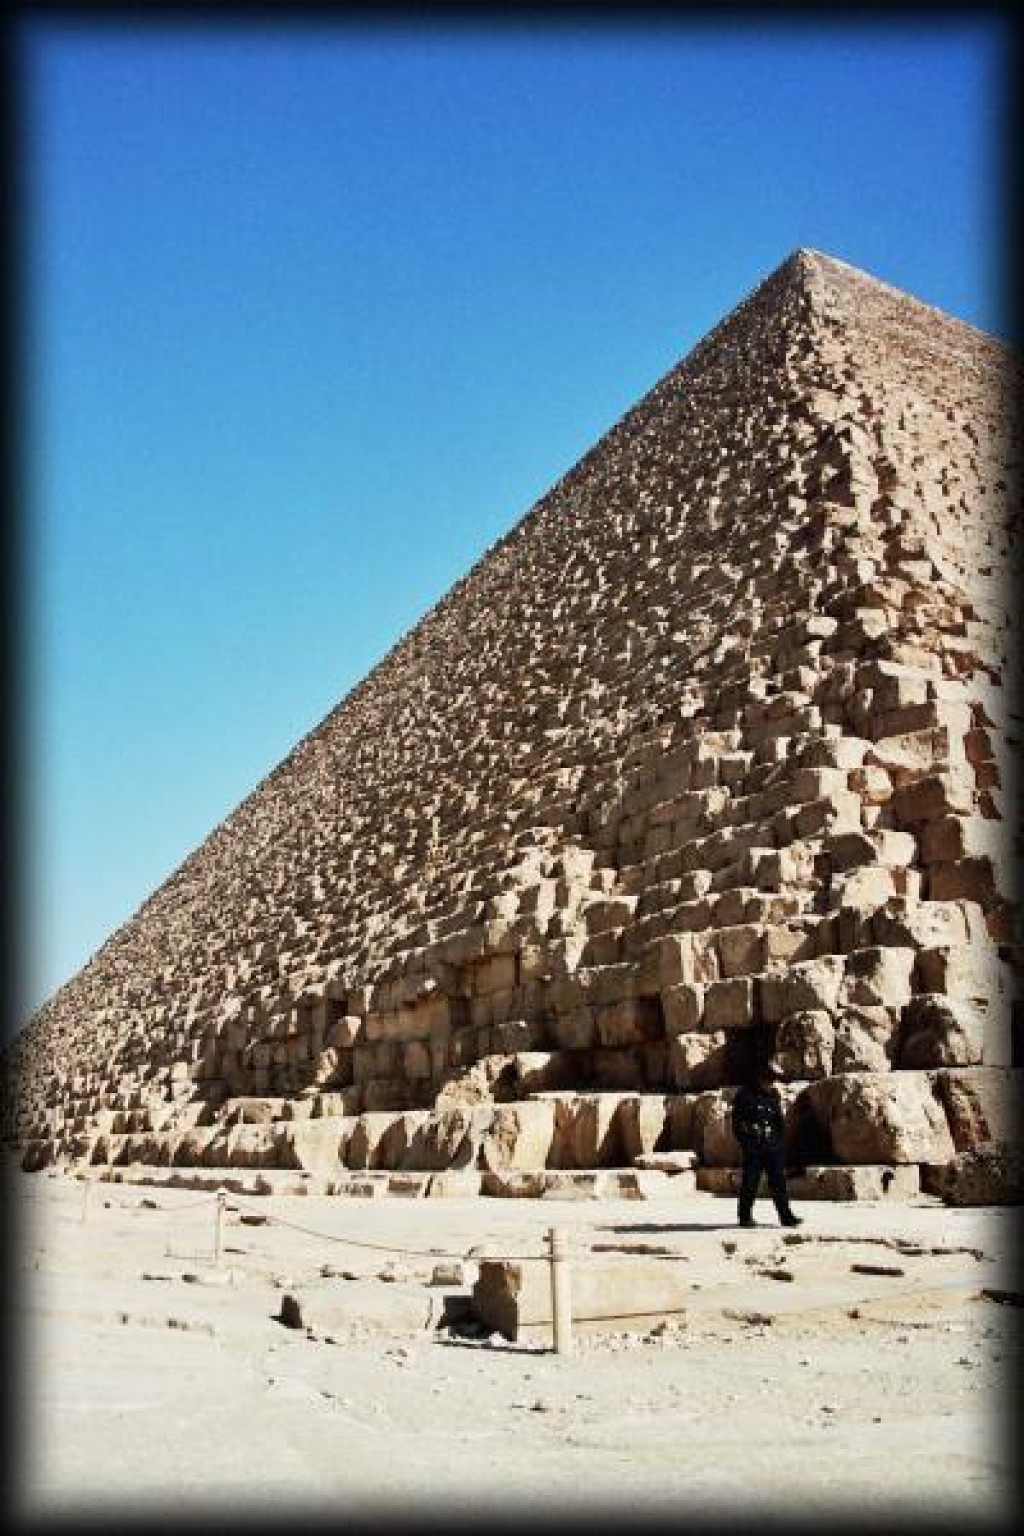 The back side of the Great Pyramid.